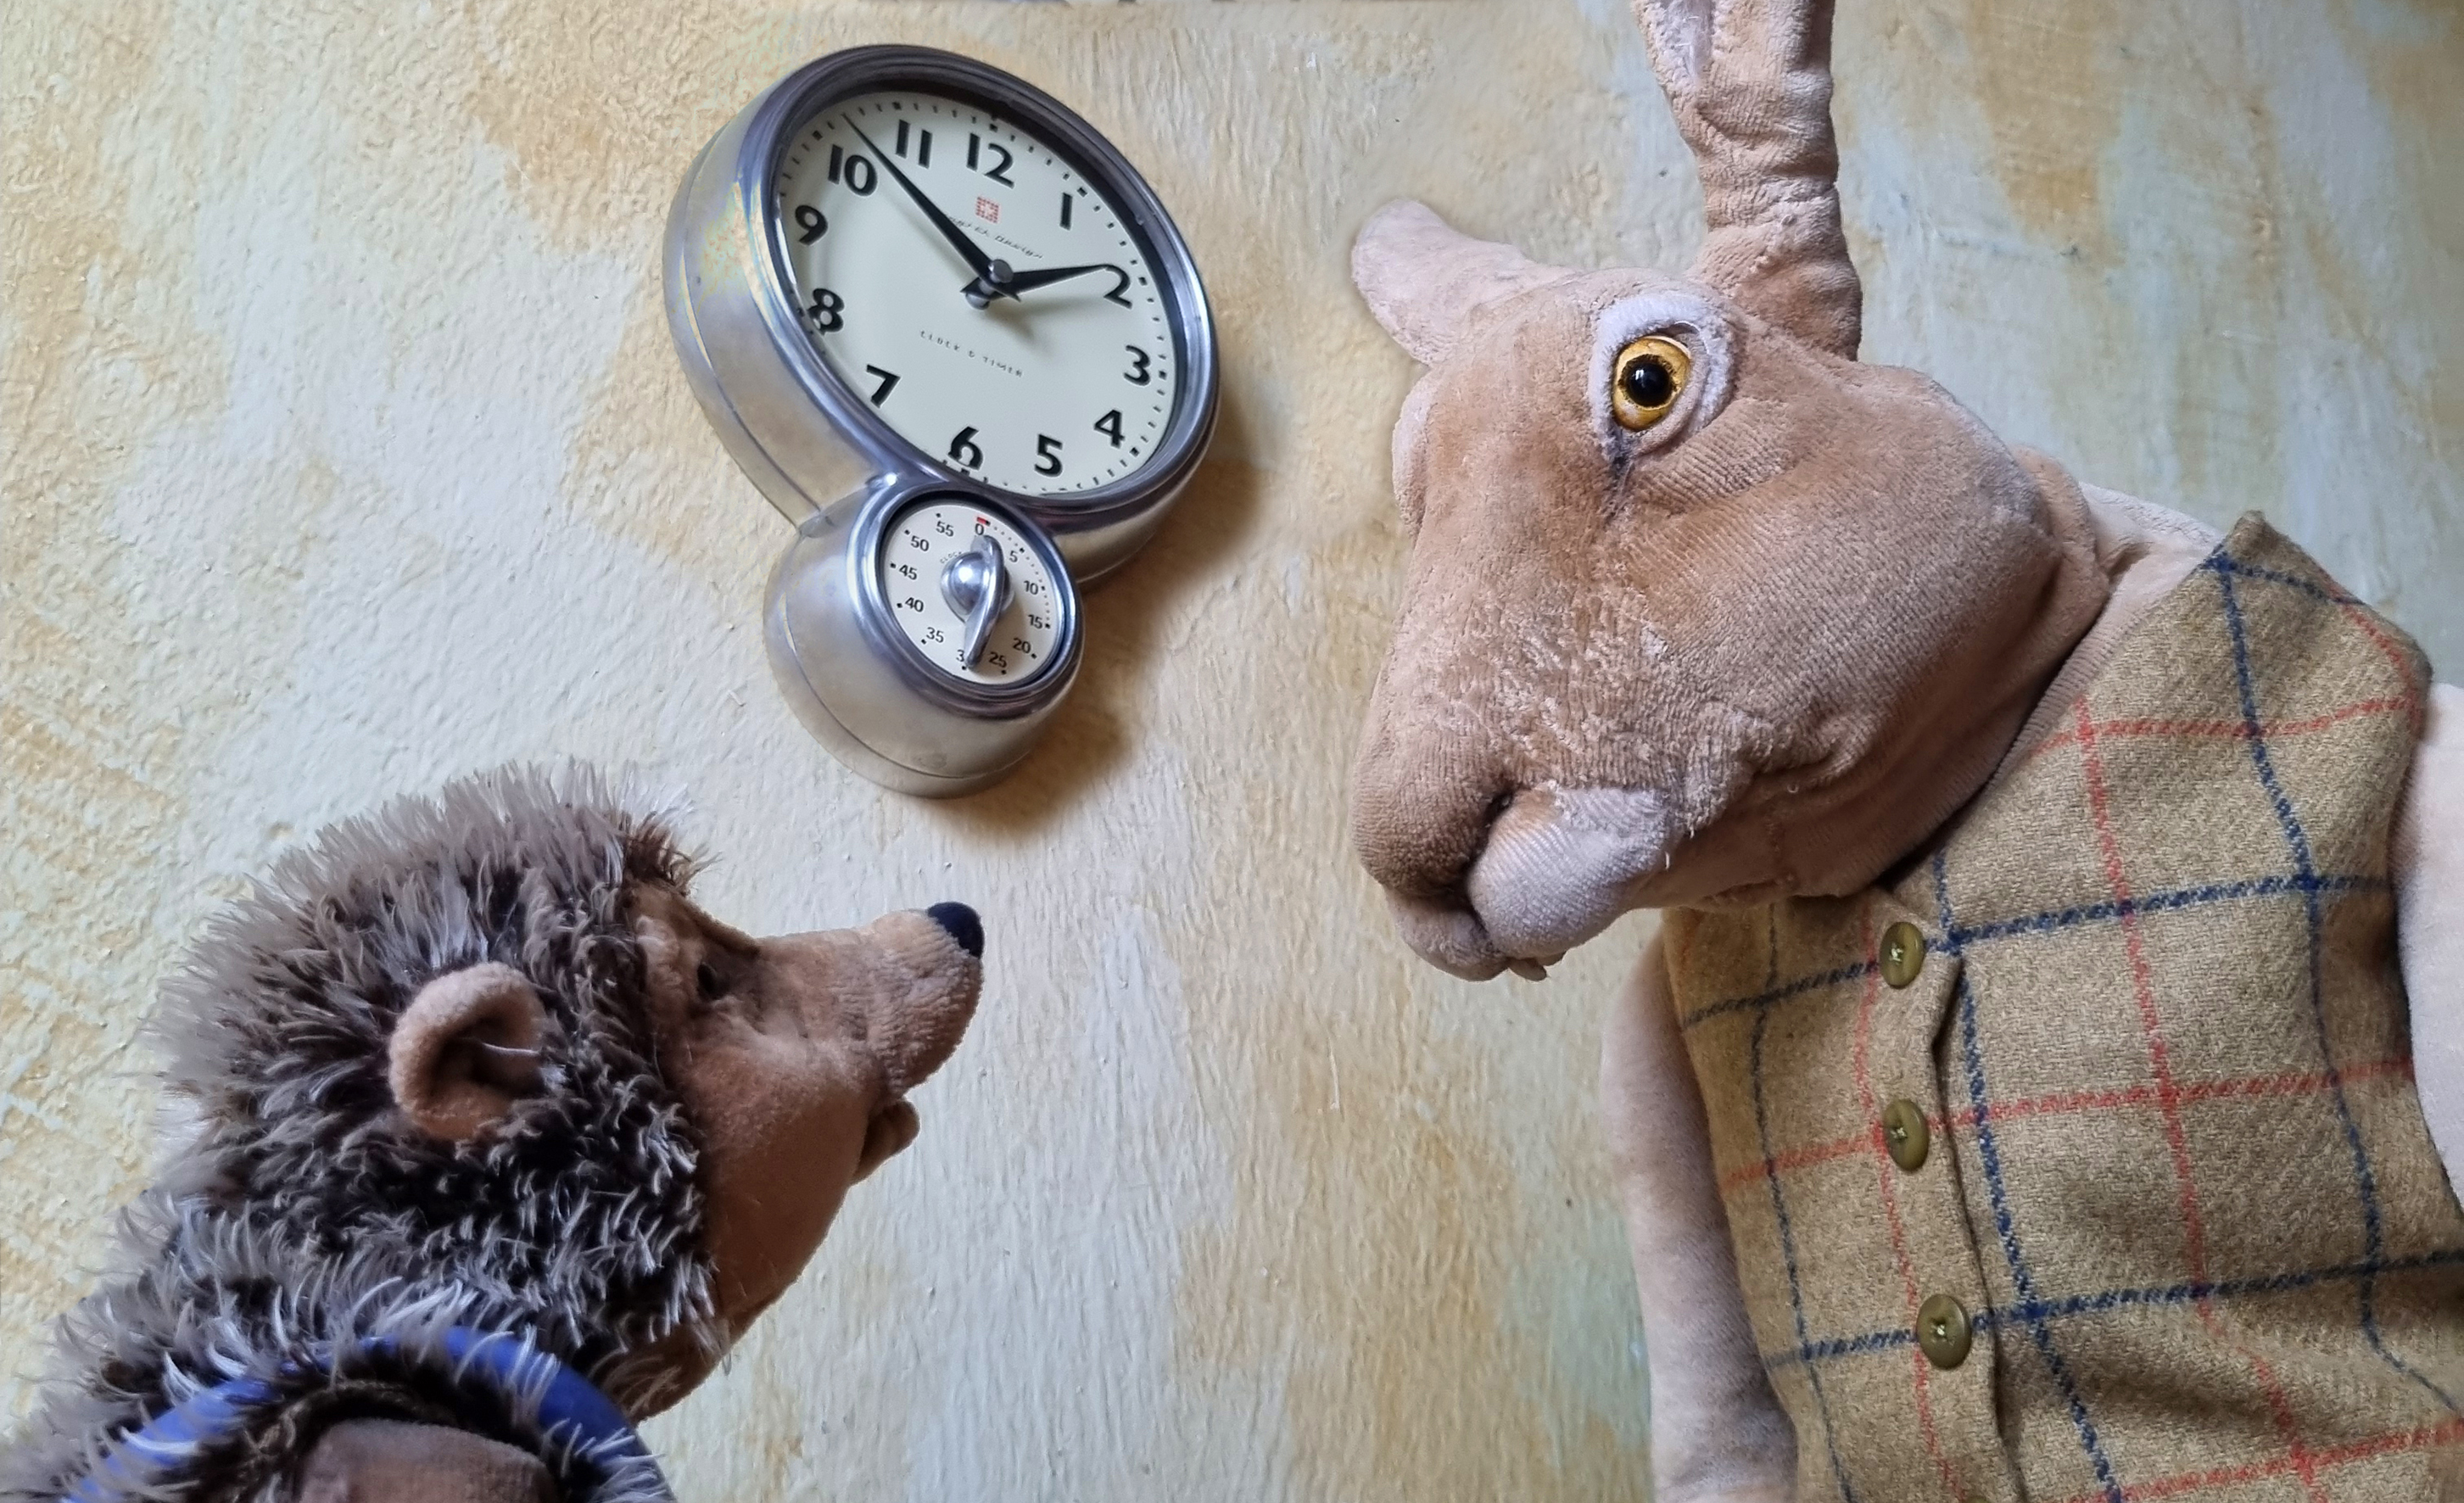 The play dolls of a rabbit and a hedgehog look at each other. Both are made of soft fabric and wear human clothes. A wall clock hangs in the background.